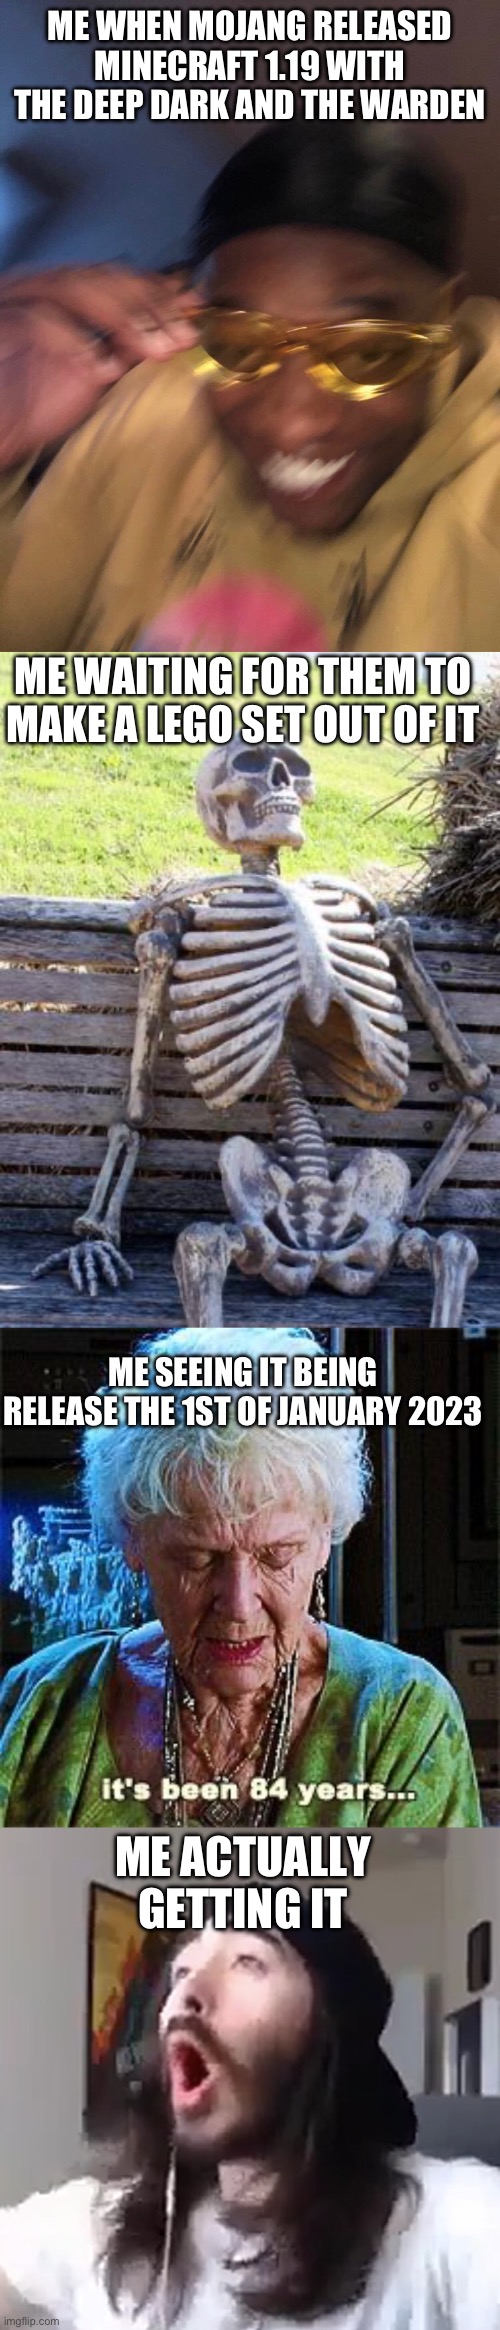 ME WHEN MOJANG RELEASED MINECRAFT 1.19 WITH THE DEEP DARK AND THE WARDEN; ME WAITING FOR THEM TO MAKE A LEGO SET OUT OF IT; ME SEEING IT BEING RELEASE THE 1ST OF JANUARY 2023; ME ACTUALLY GETTING IT | image tagged in memes,waiting skeleton,it's been 84 years,wooooo yeah baby,lego,minecraft | made w/ Imgflip meme maker